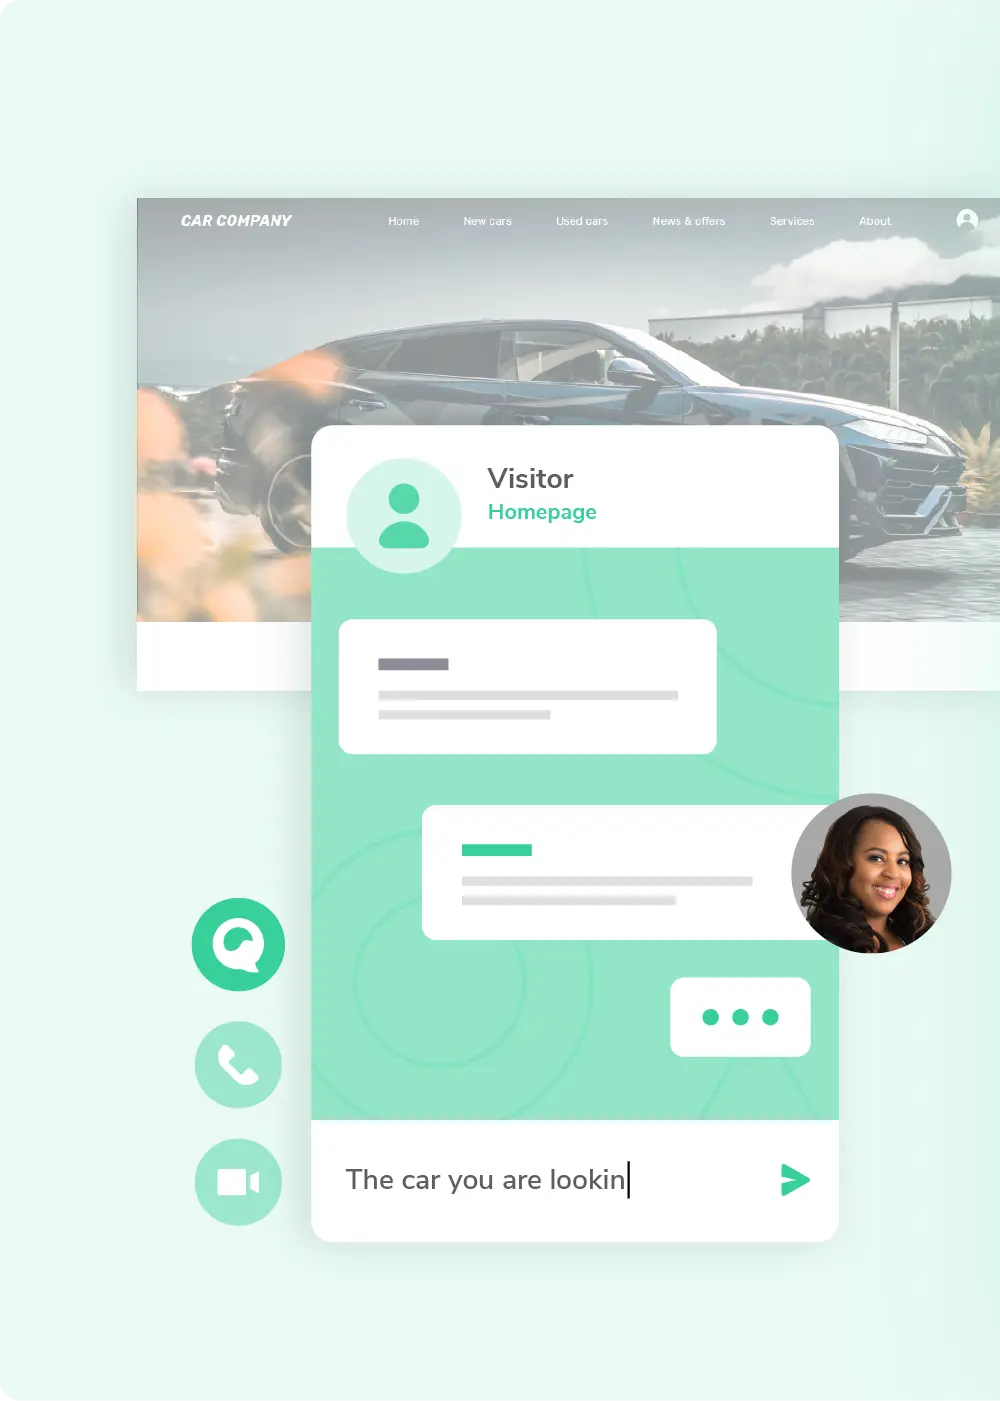 giosg targeting and live chat used on automotive website to sell more cars through live chat